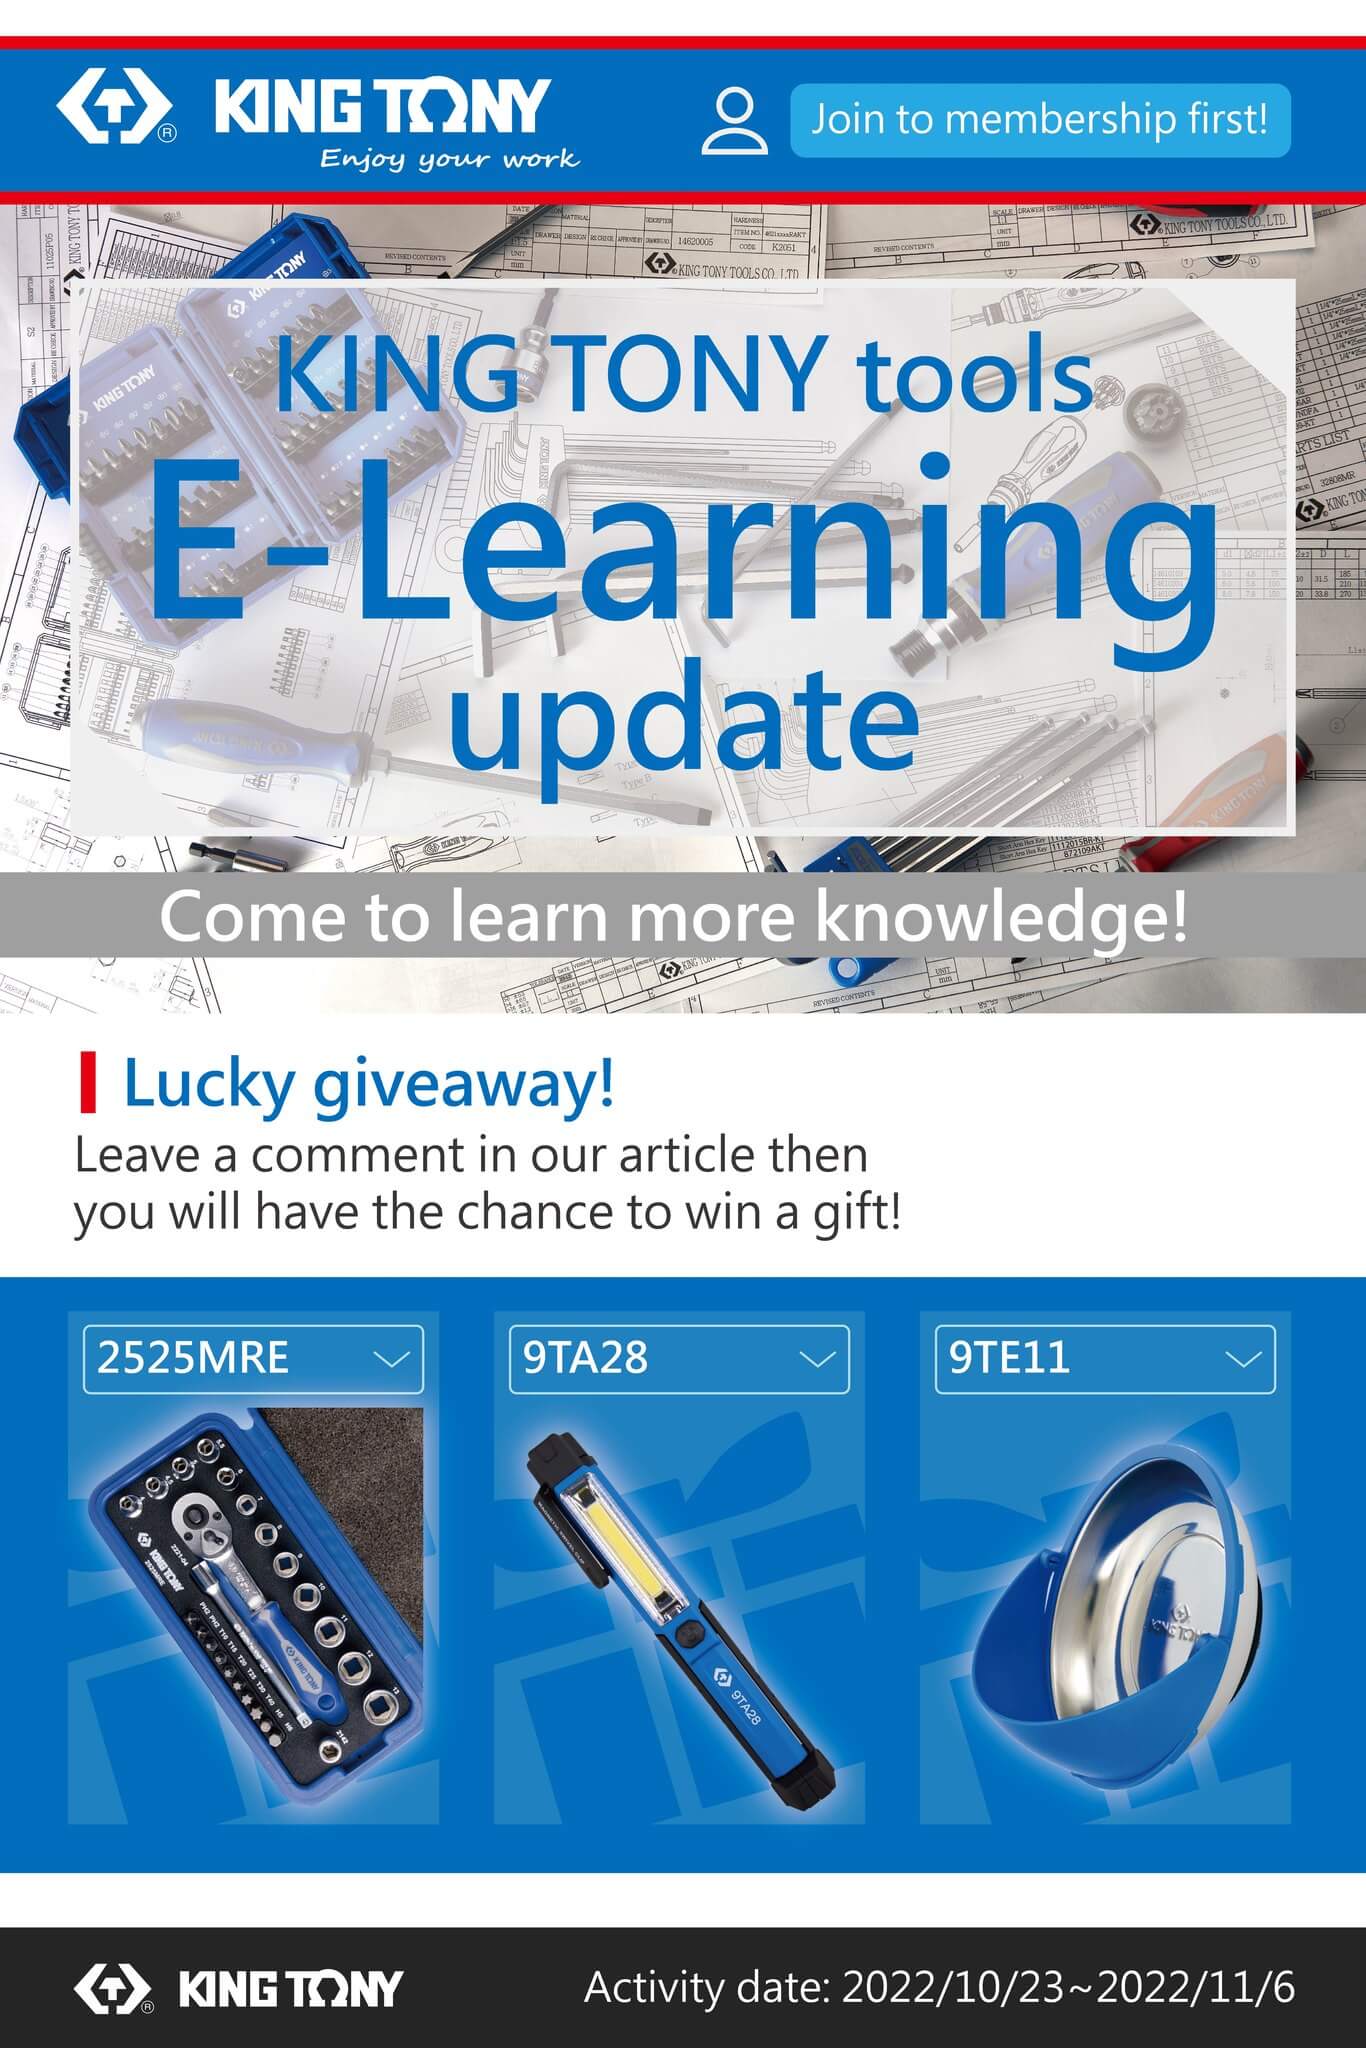 Tool E-learning has been updated to a new version!